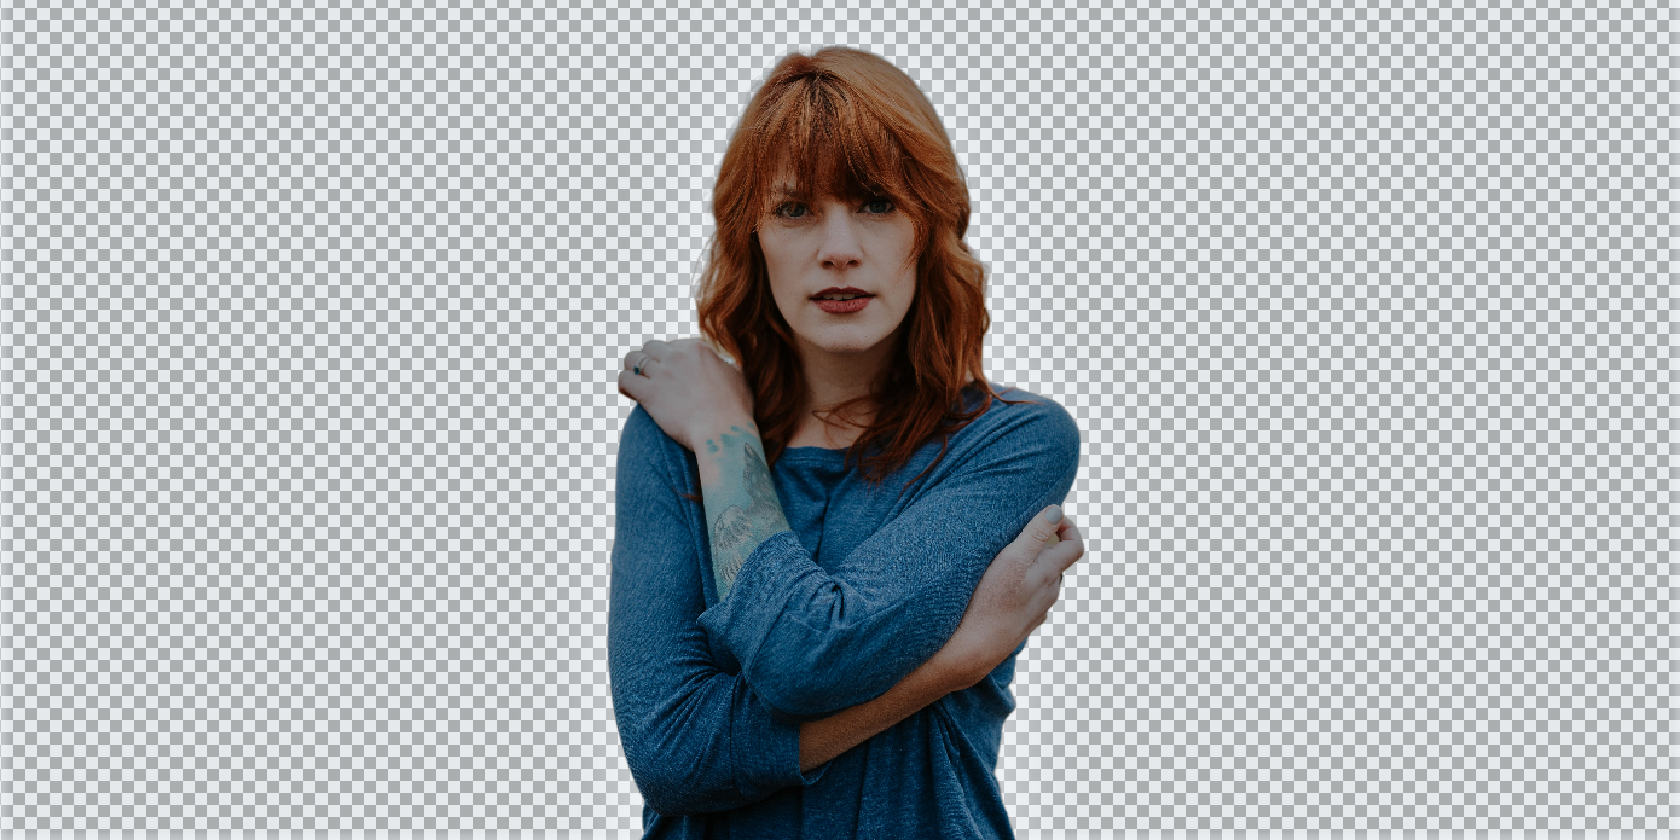 Transparent Background Image of Woman